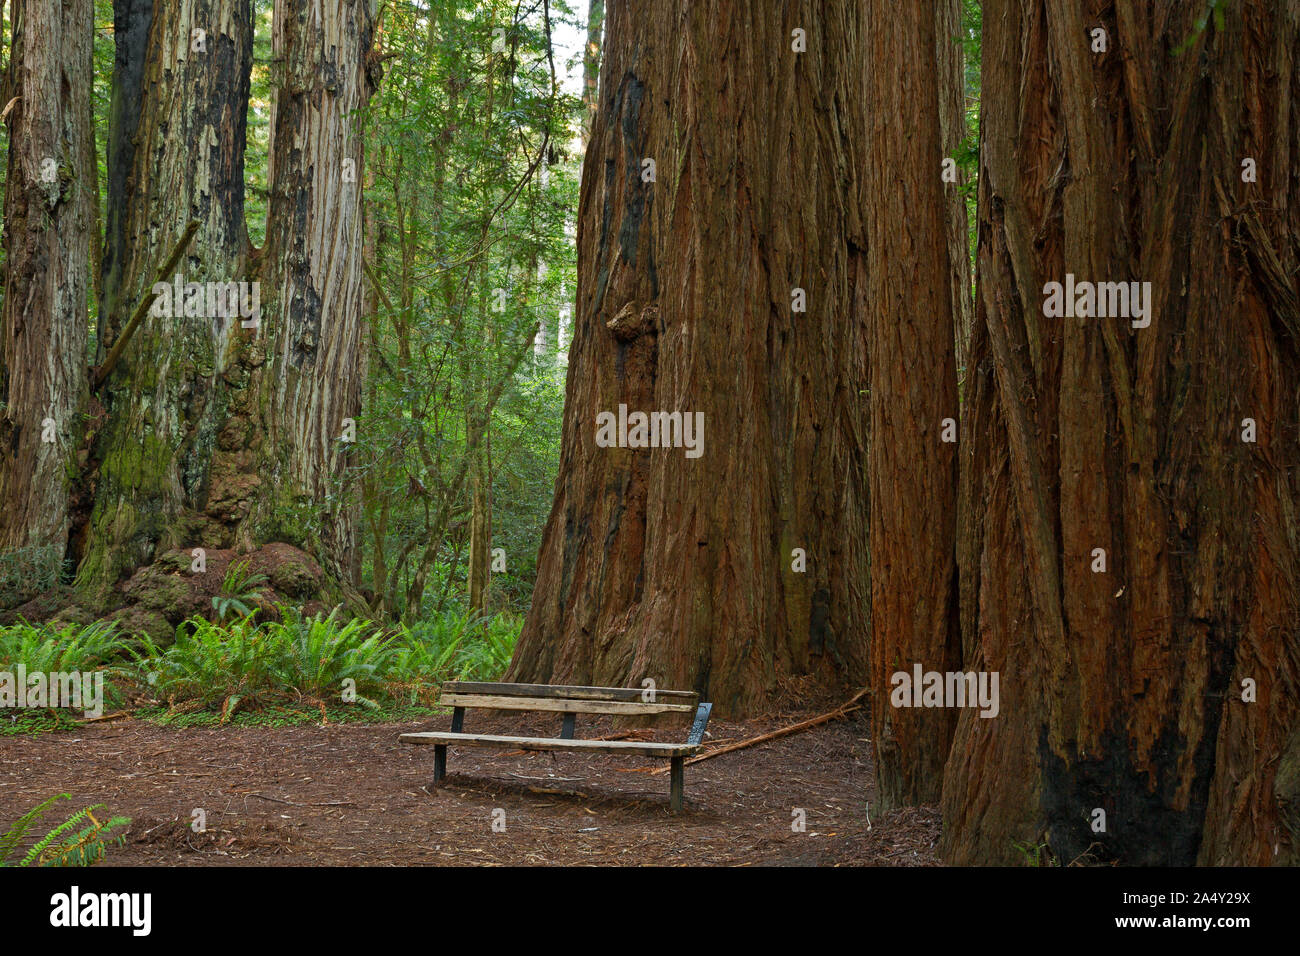 CA03708-00...CALIFORNIA - A bench among the massive redwood trees at Tall Trees Grove in Redwoods National Park. Stock Photo